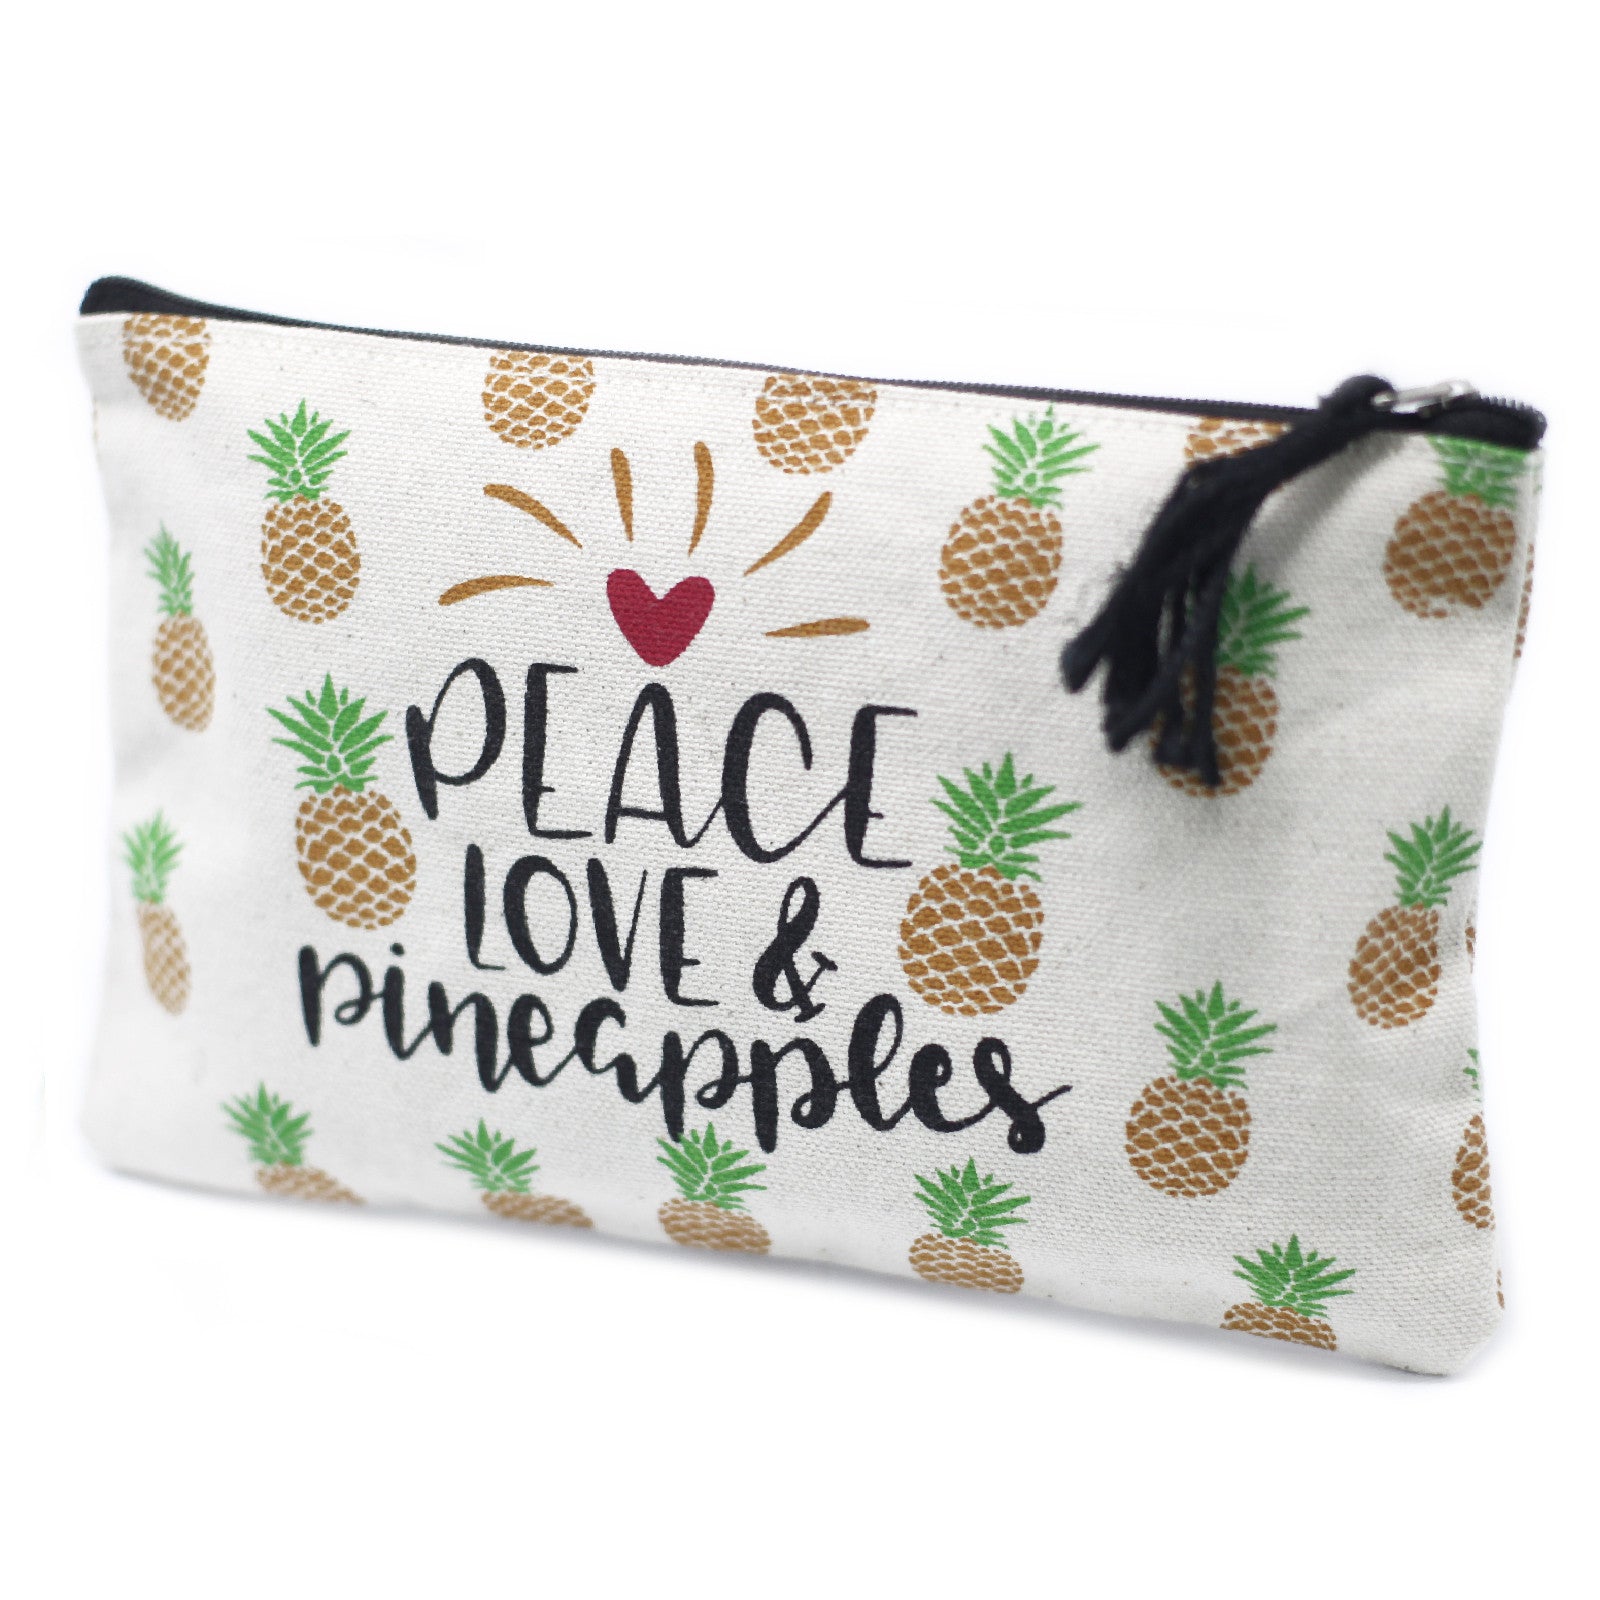 View Classic Zip Pouch Pineapples information